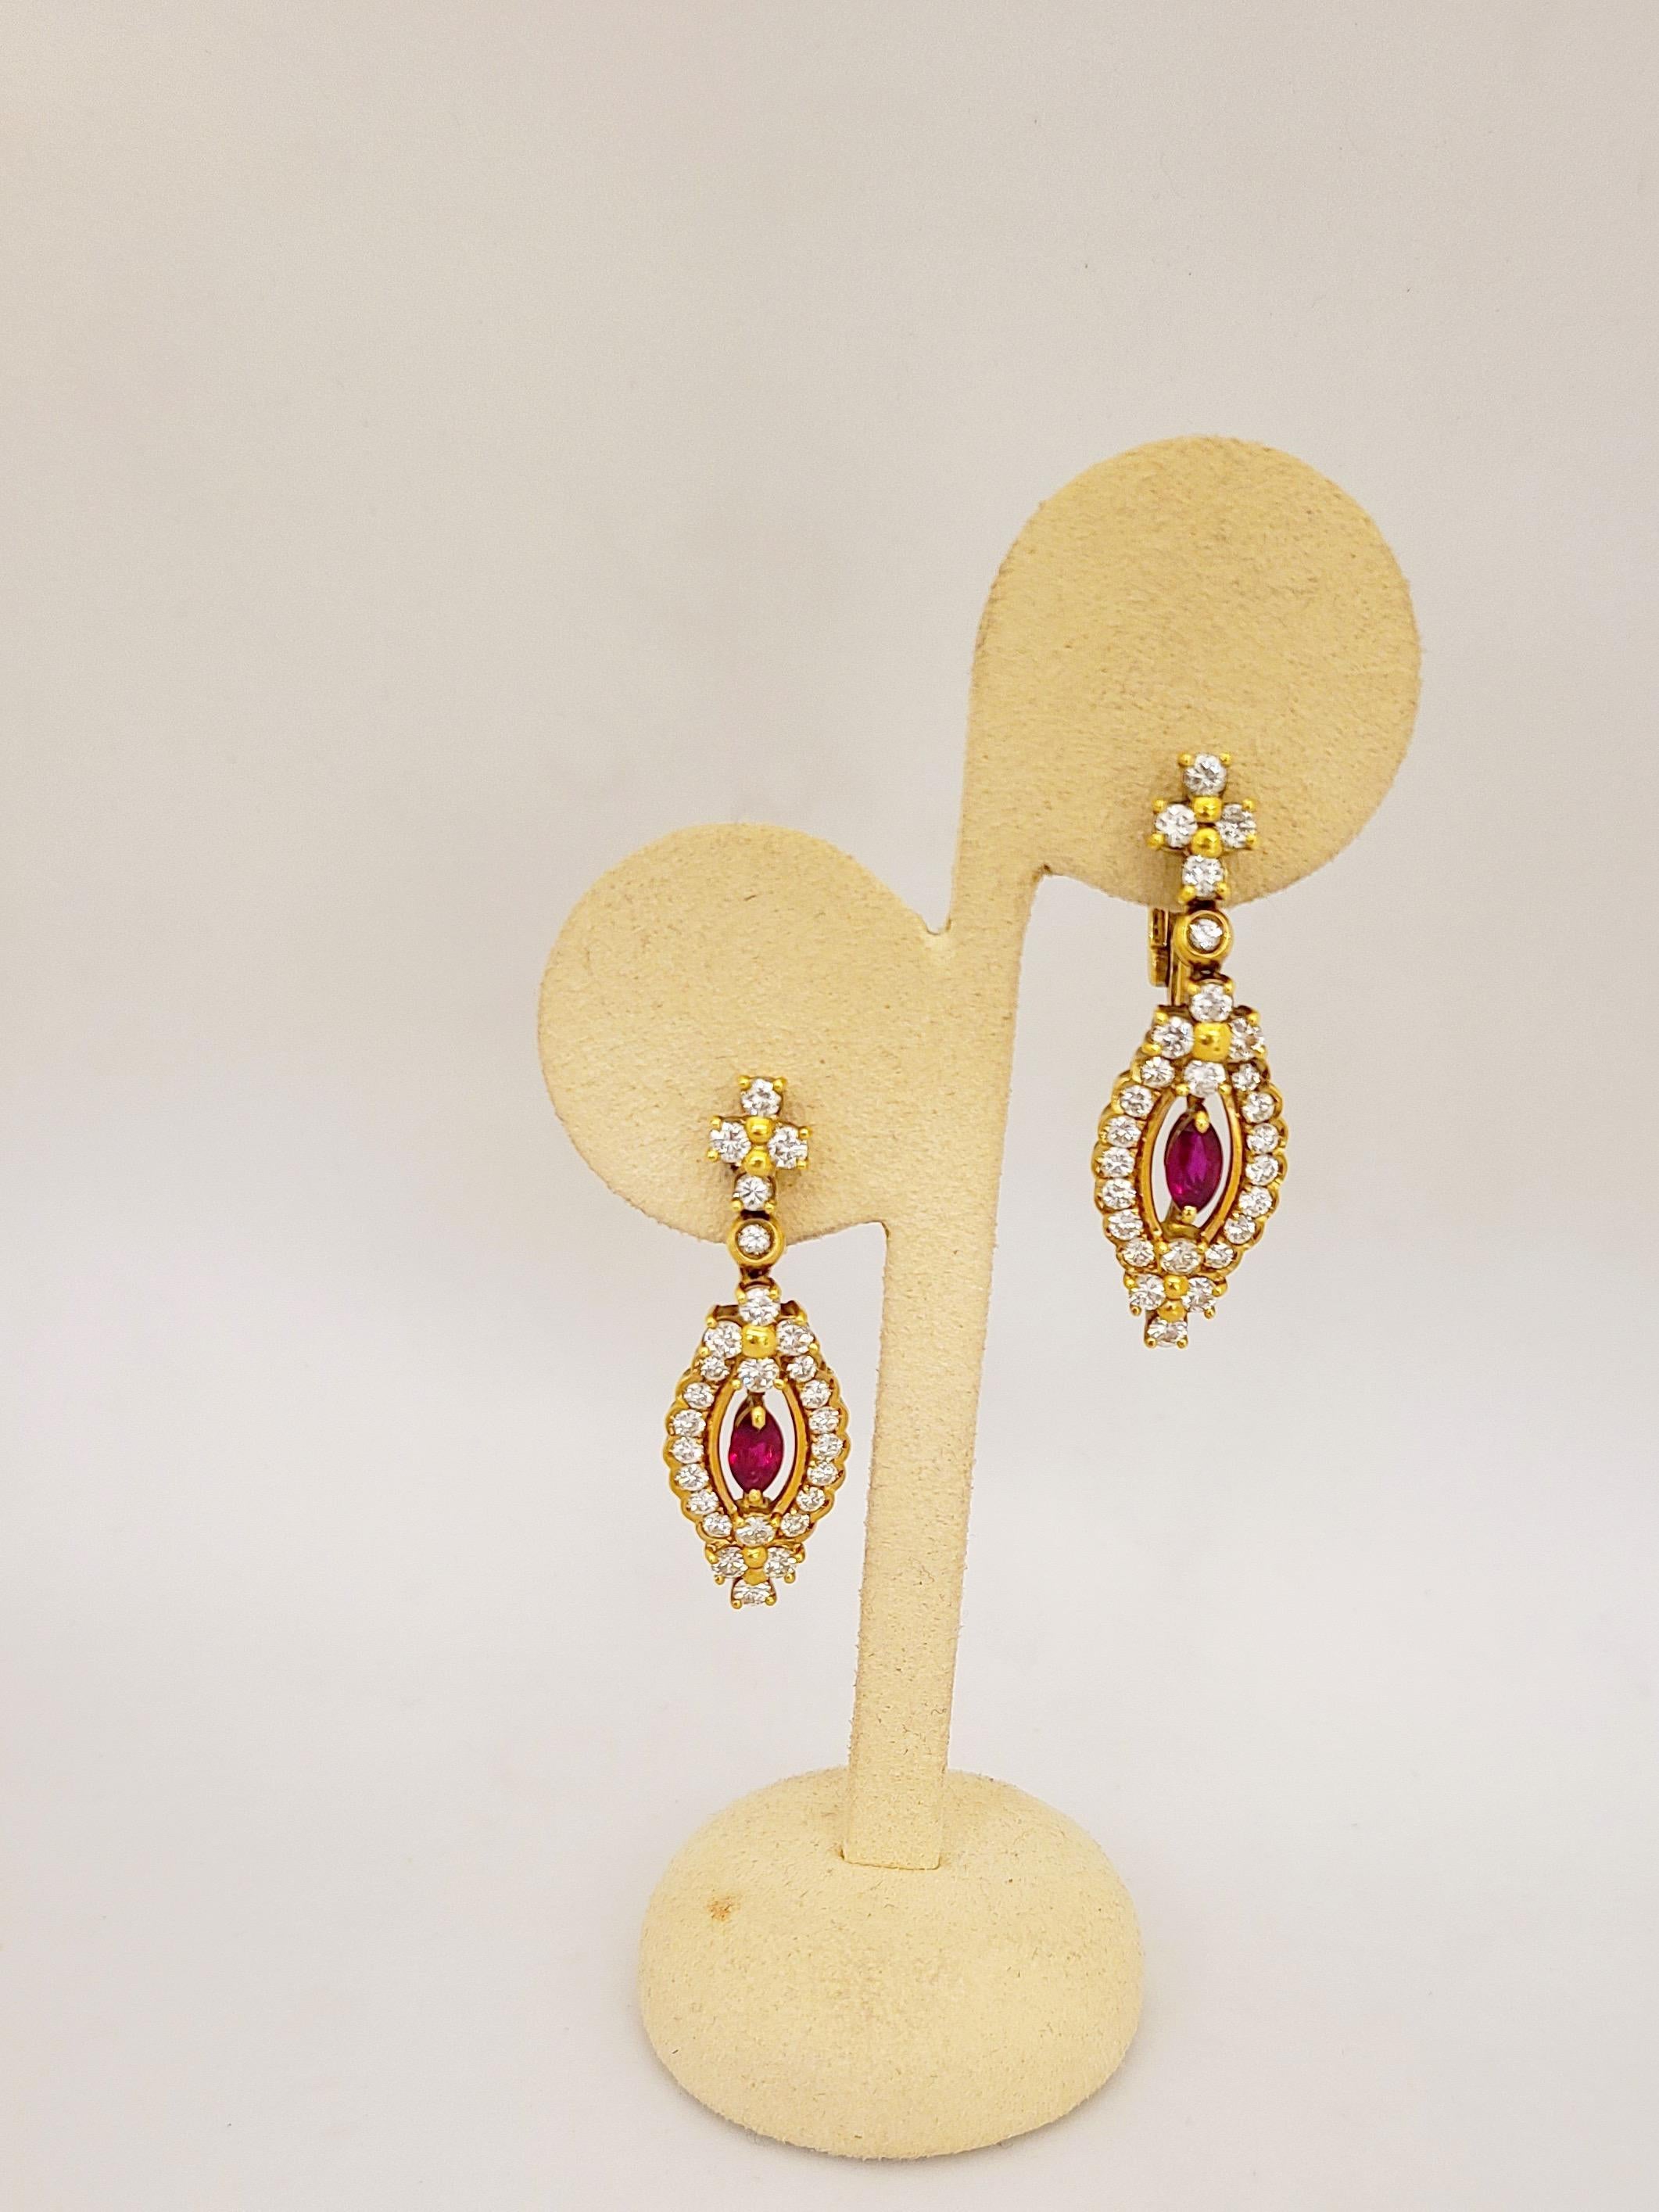 18 karat yellow gold earrings, by Cellini Jewelers NYC featuring marquise shaped ruby centers surrounded by round brilliant diamonds. The 1.5